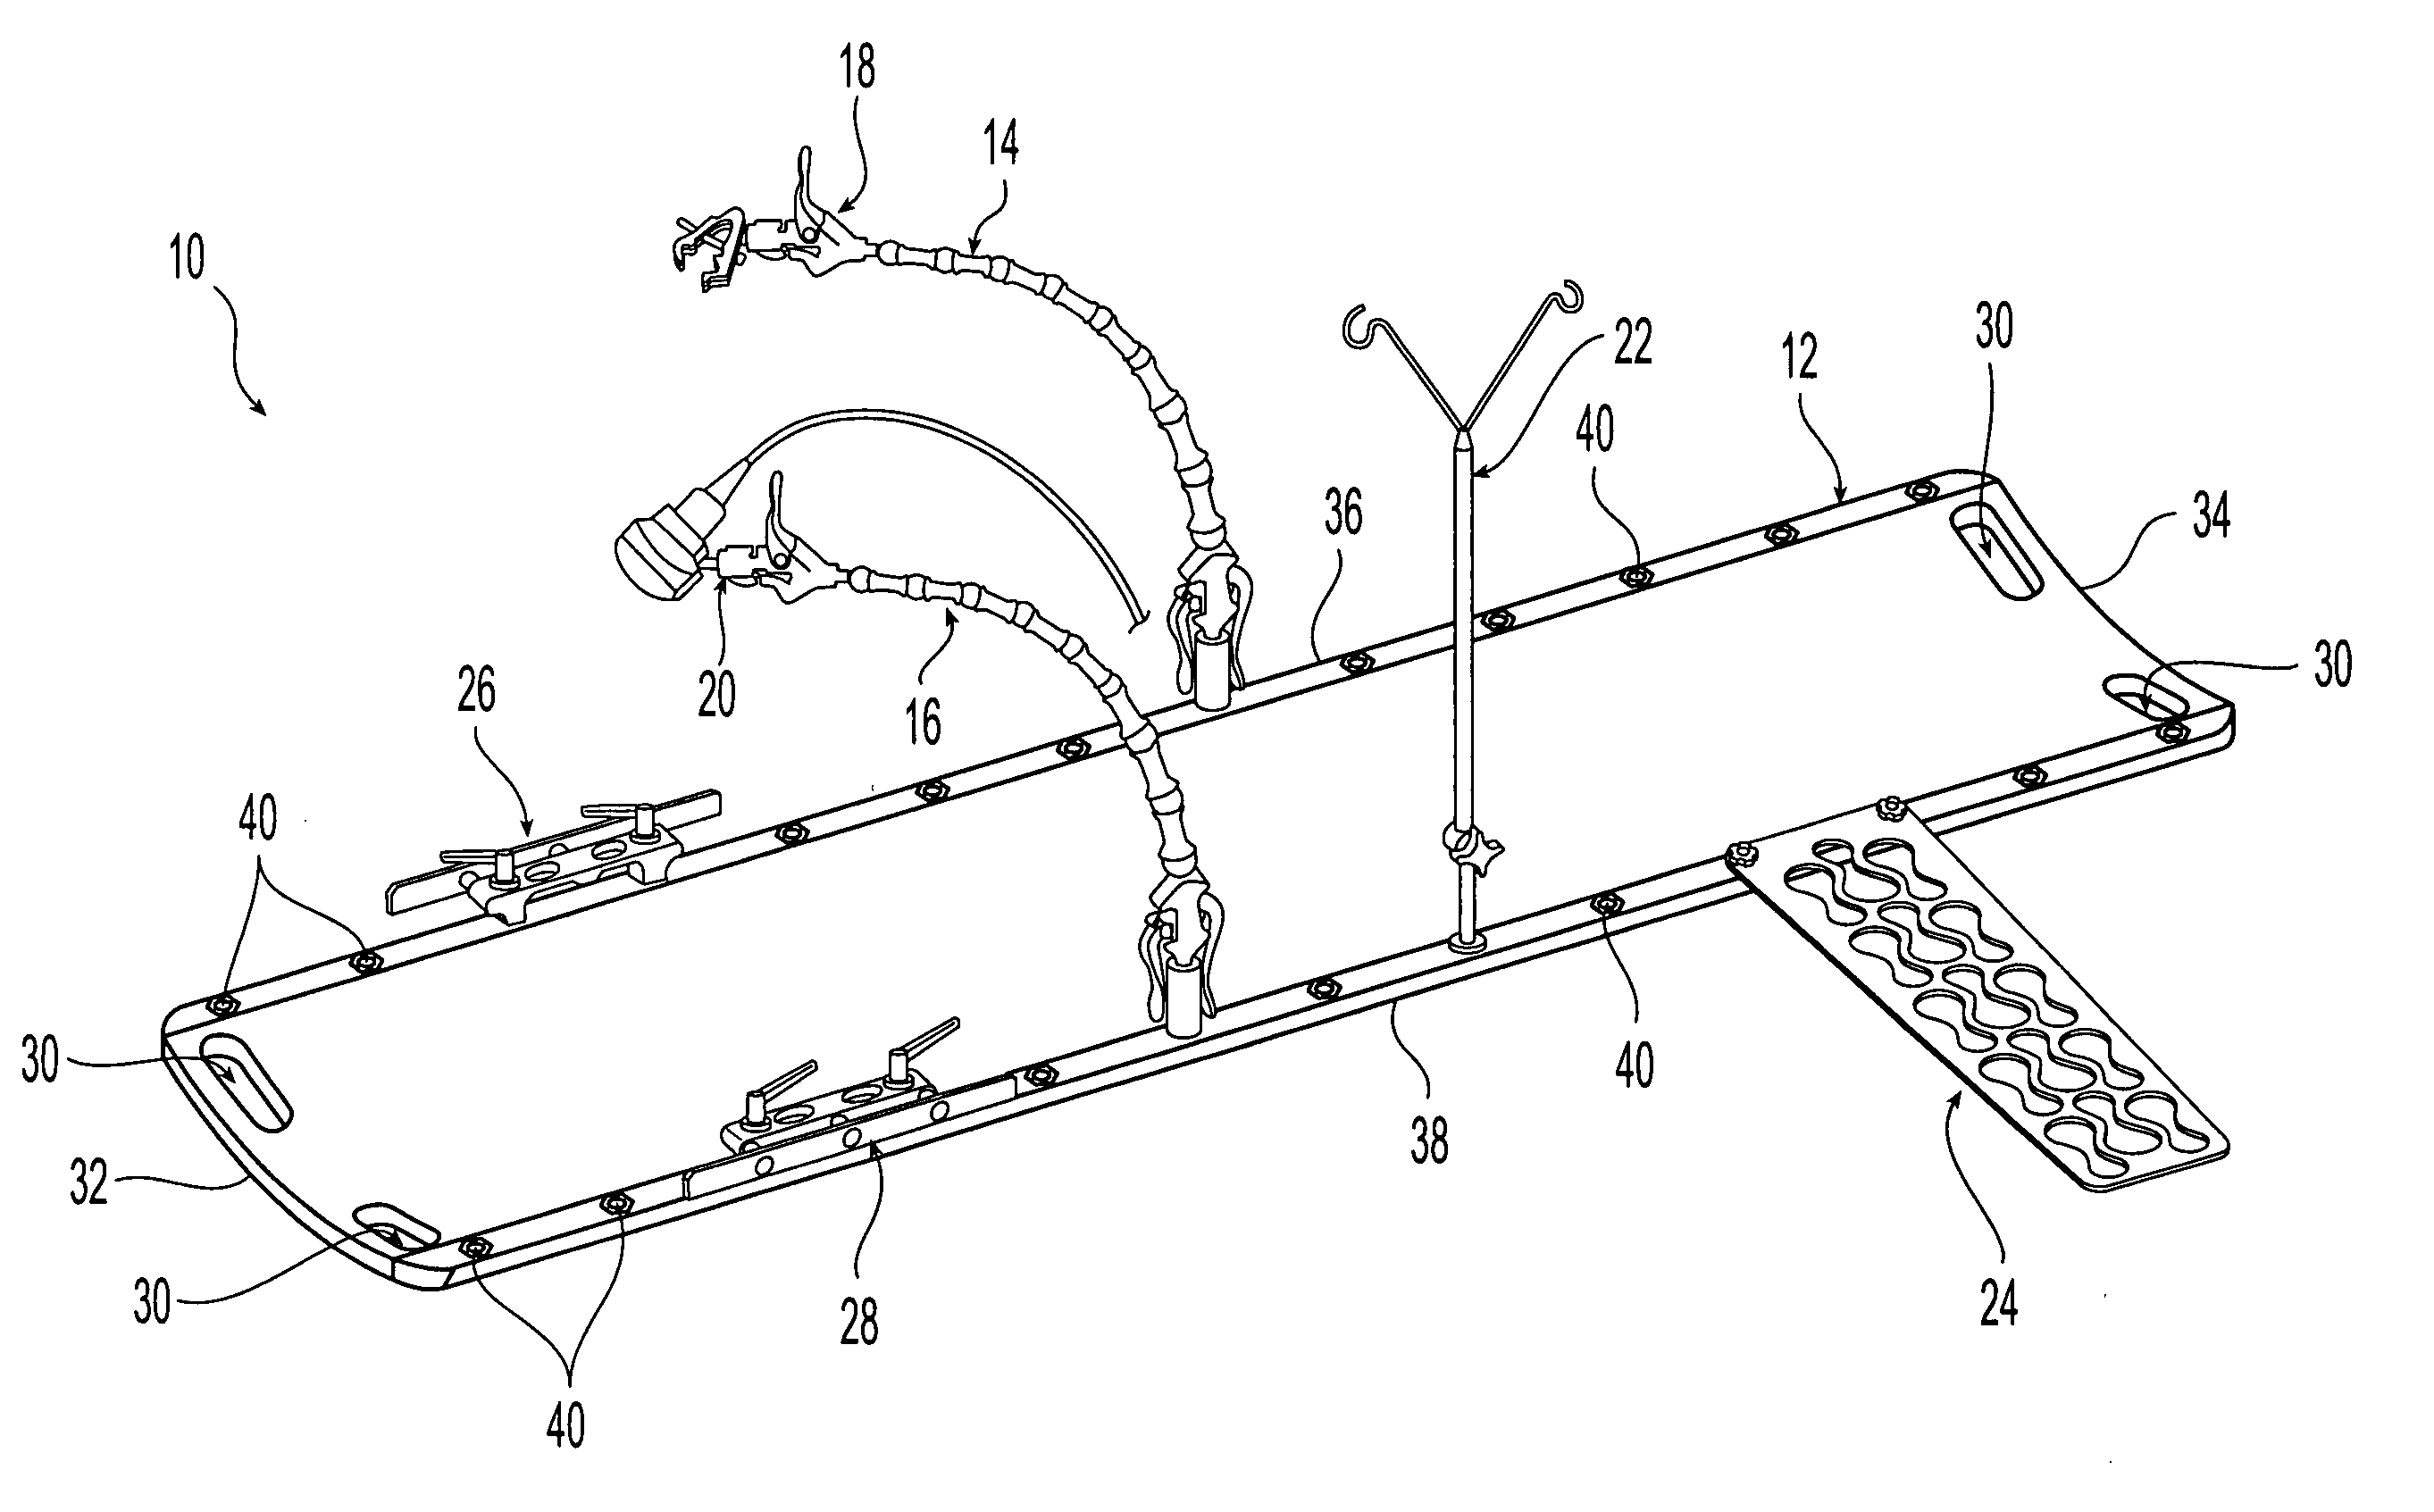 Support system for use when performing medical imaging of a patient